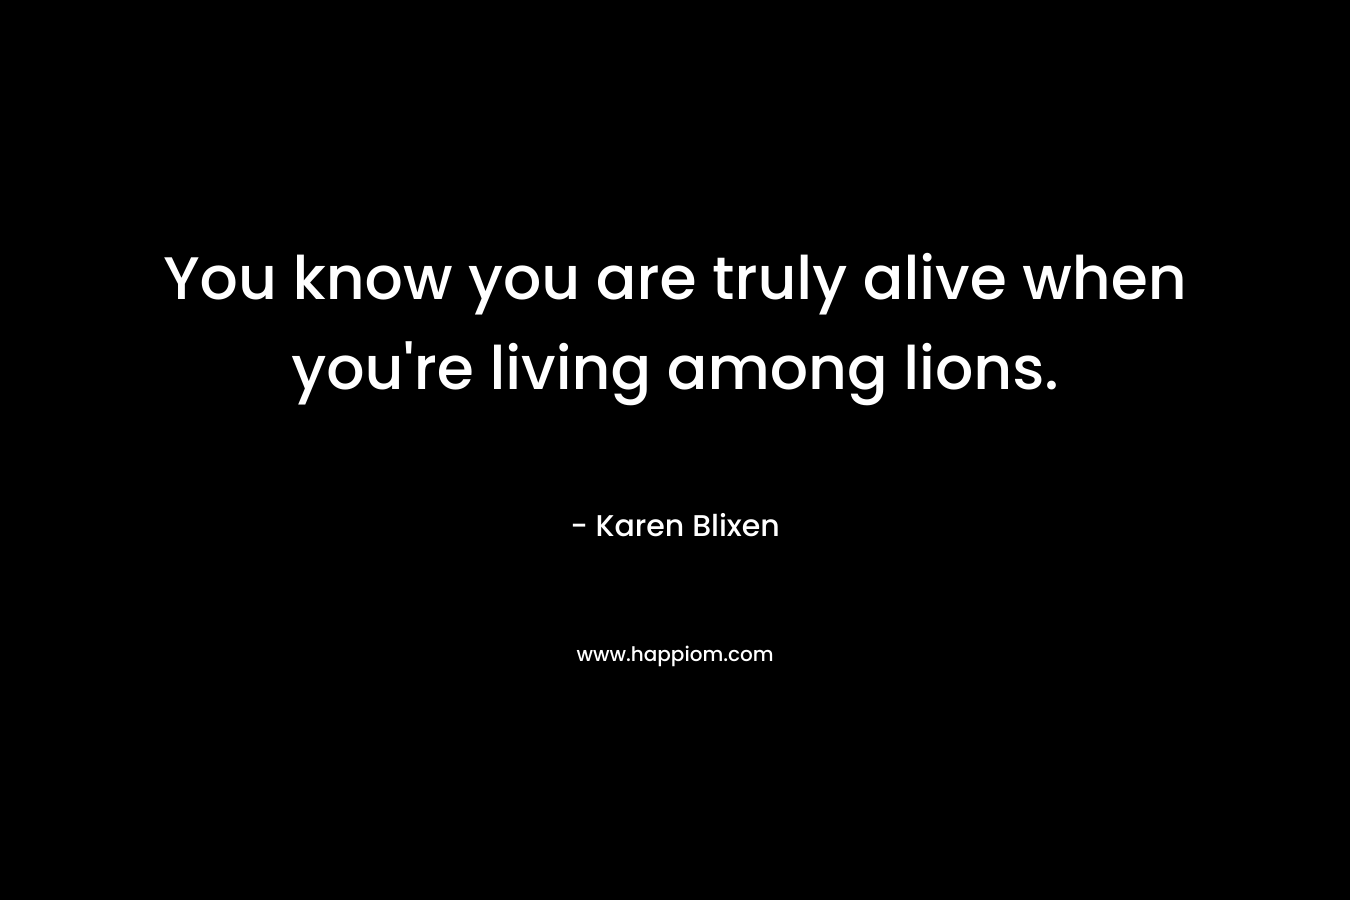 You know you are truly alive when you’re living among lions. – Karen Blixen